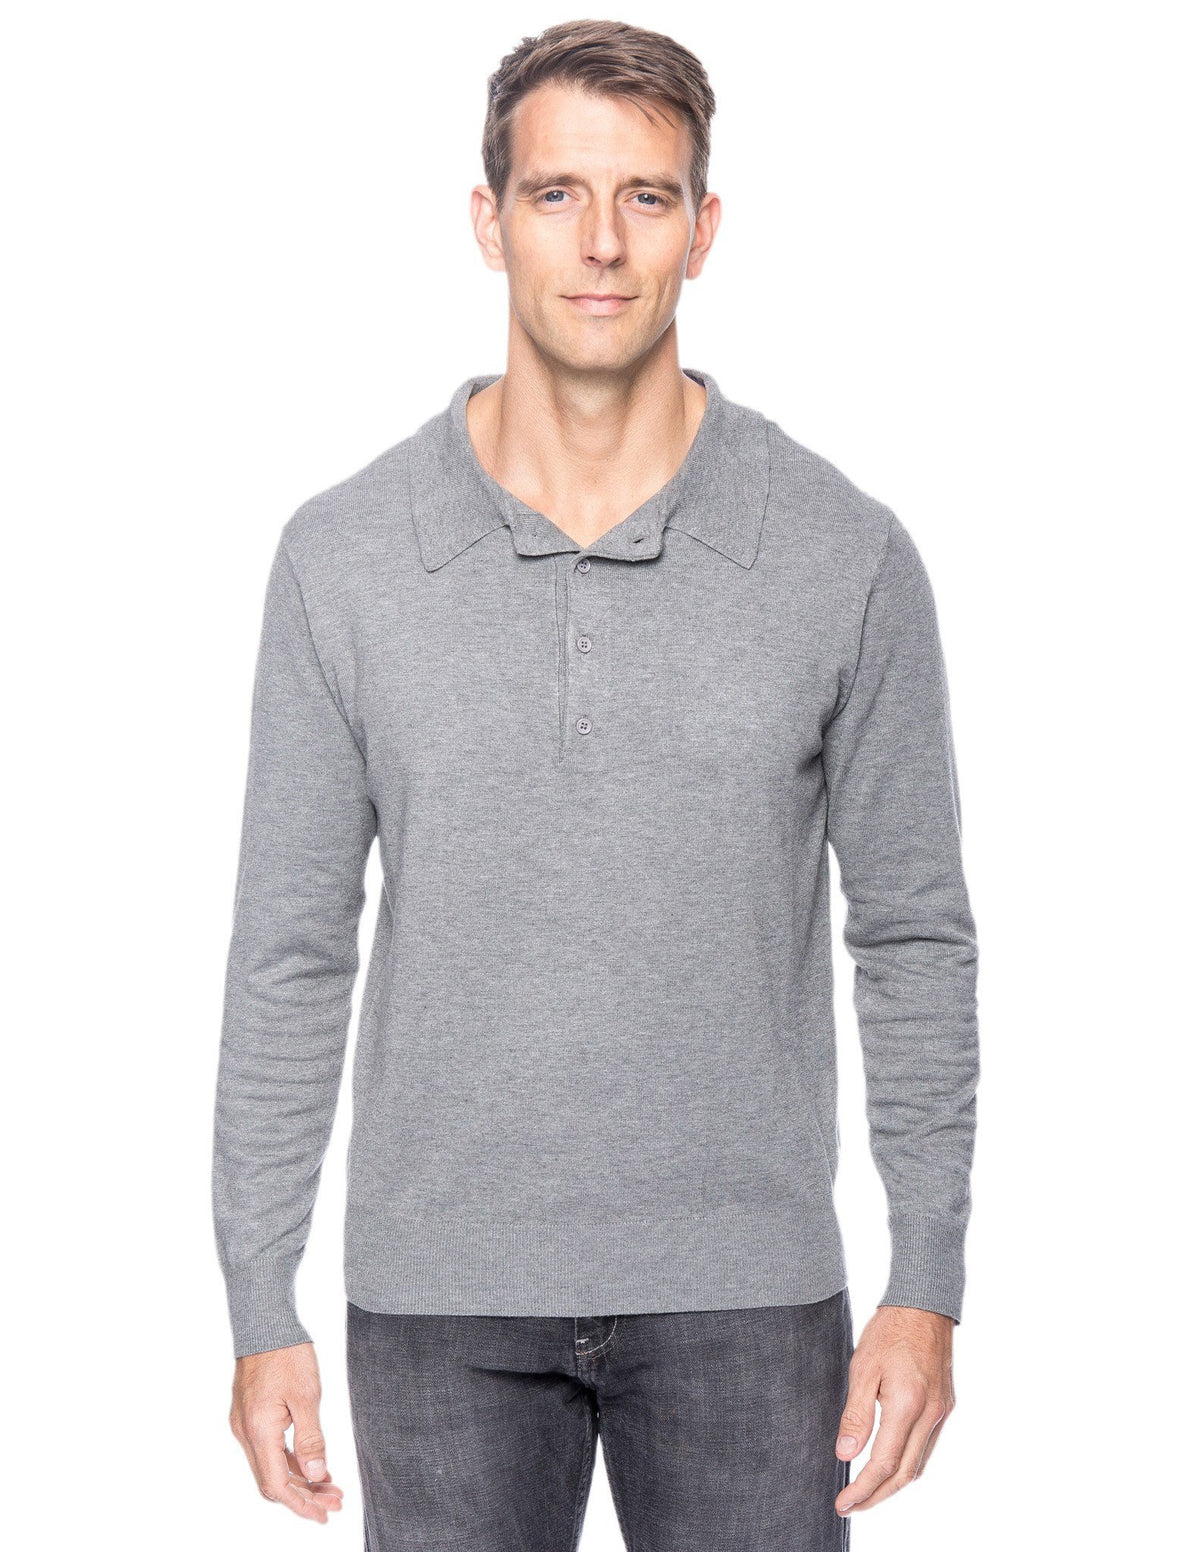 Men's Classic Knit Long Sleeve Polo Sweater - Heather Grey